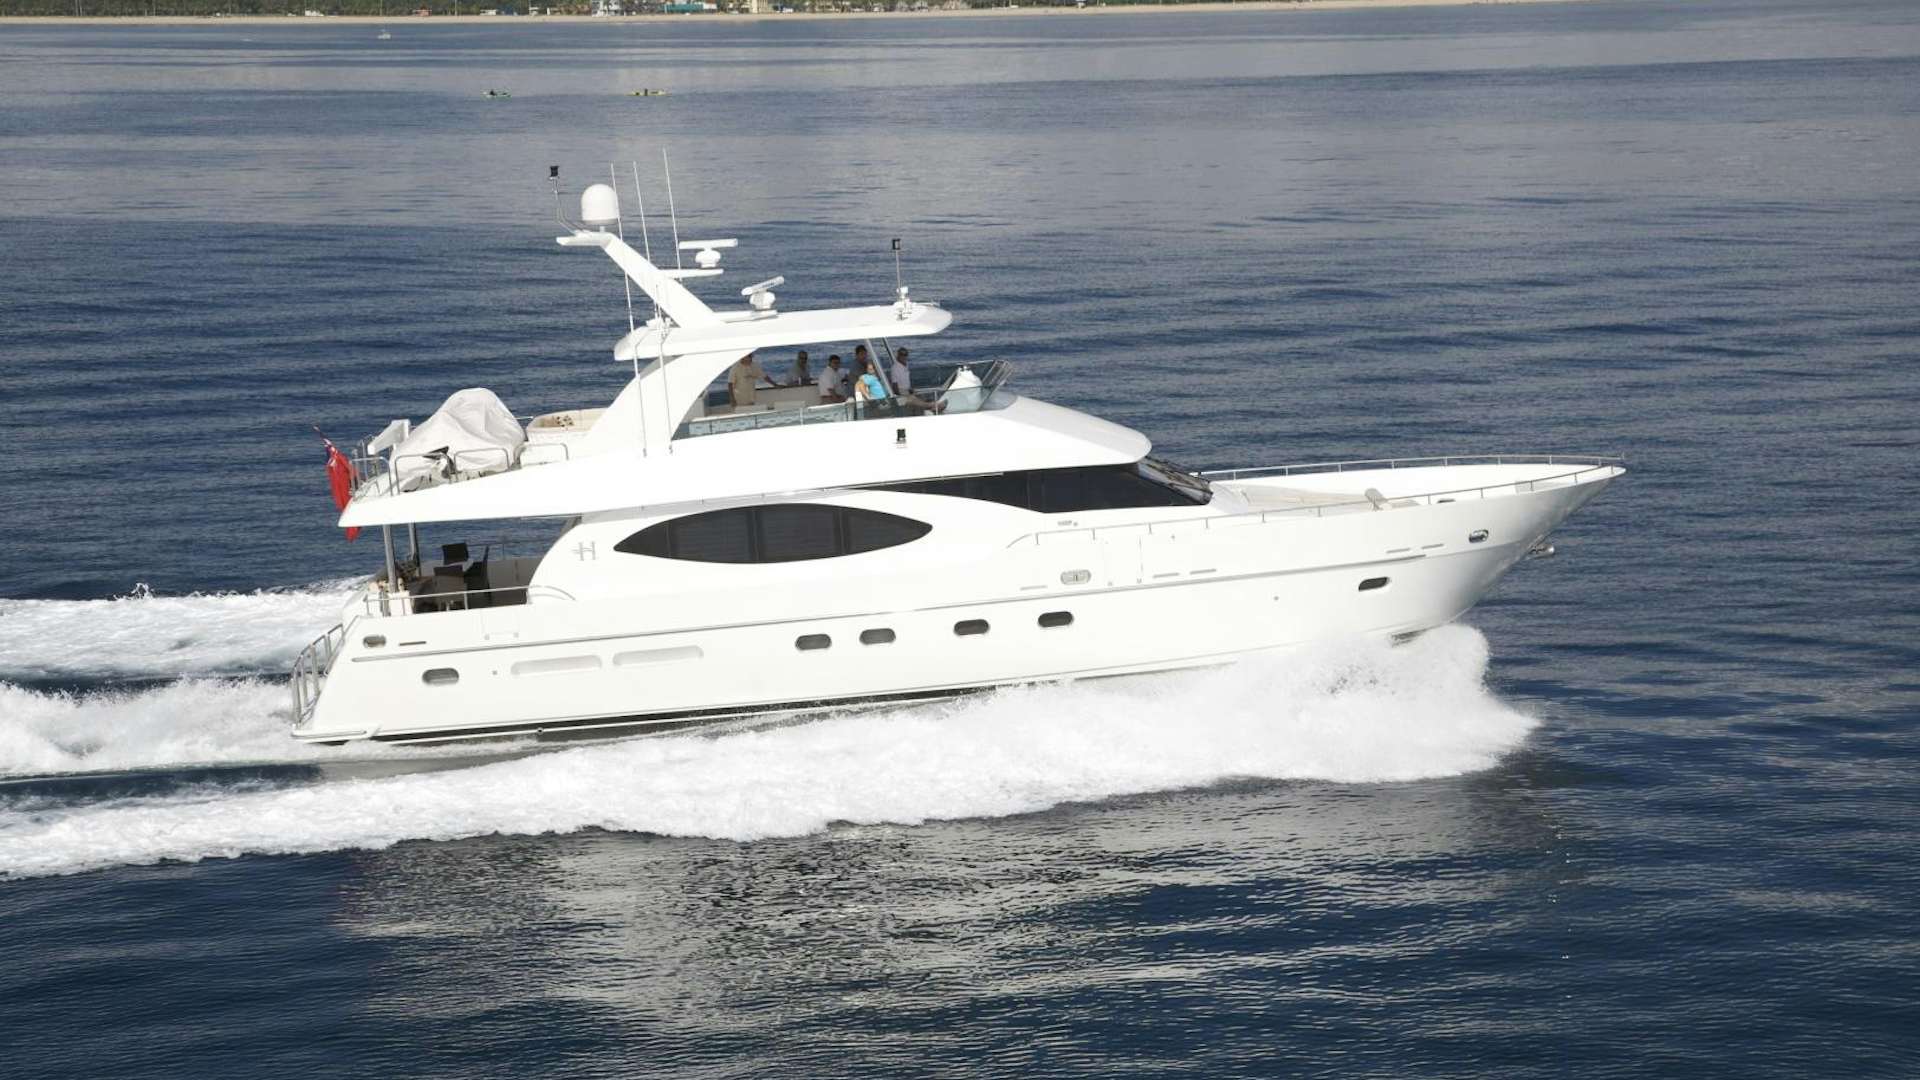 Lady c ii
Yacht for Sale